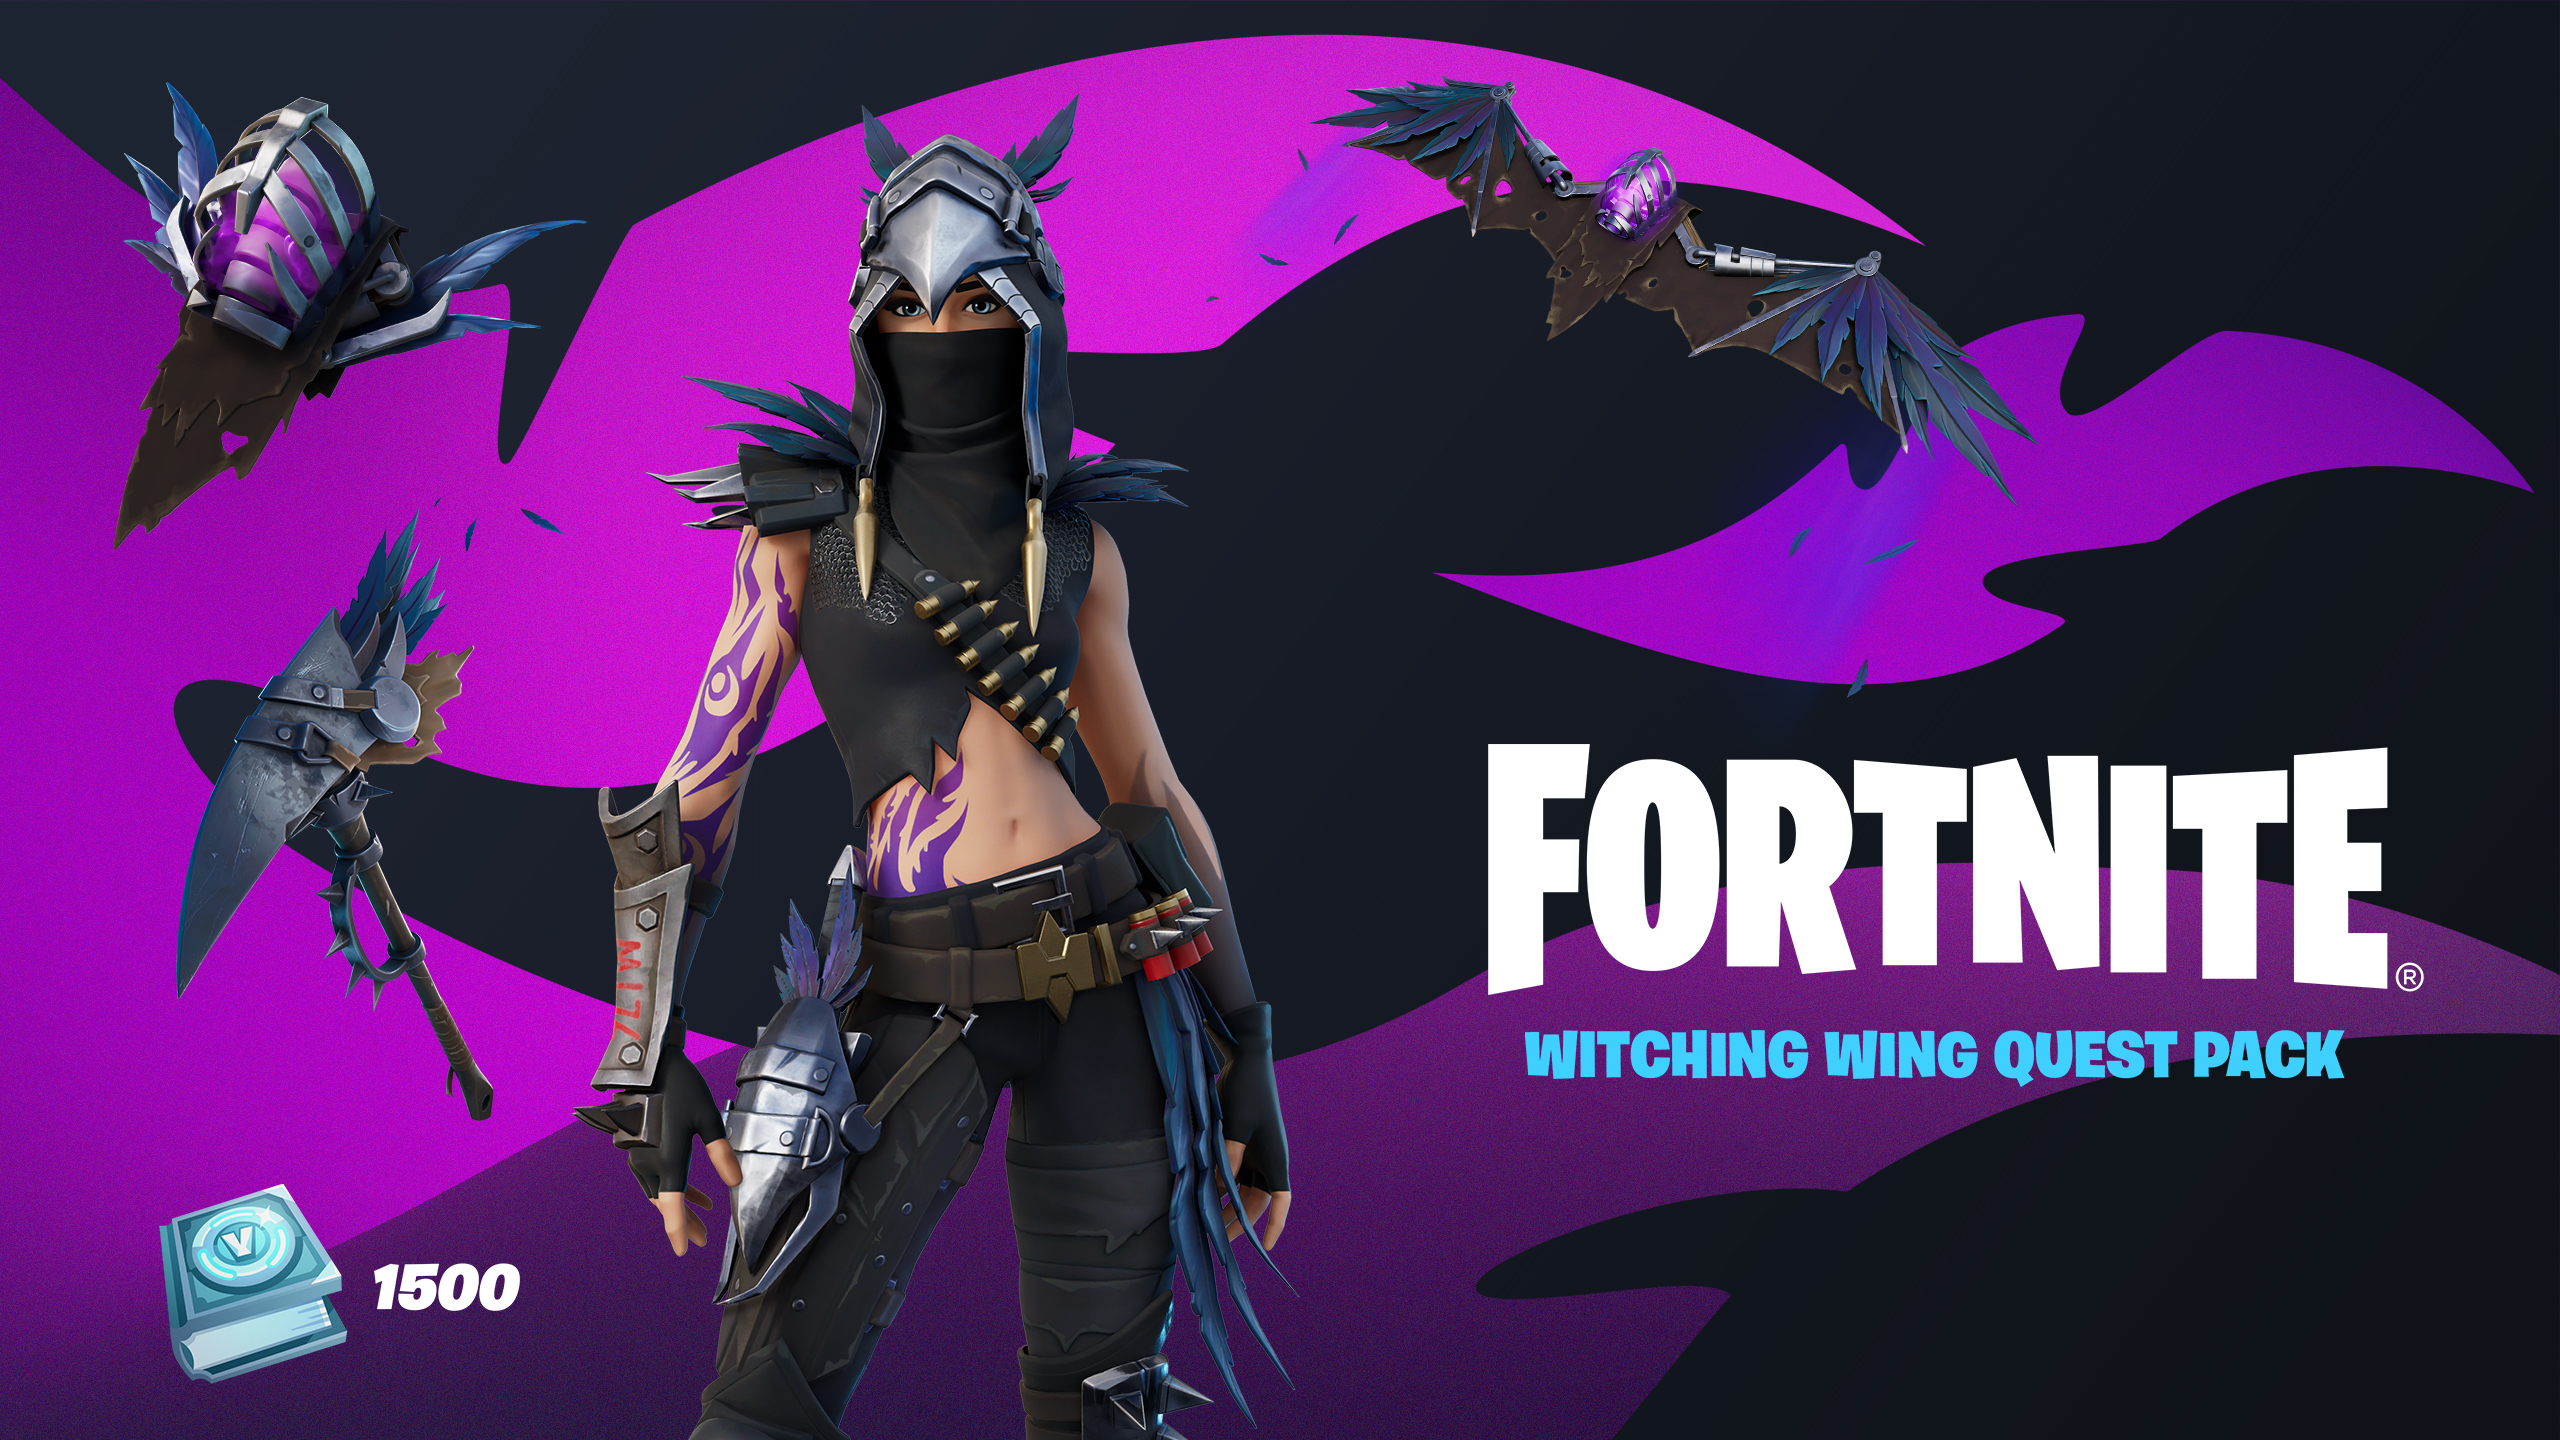 Fortnite - Witching Wing Quest Pack EU XBOX One / Xbox Series X|S CD Key, $154.8